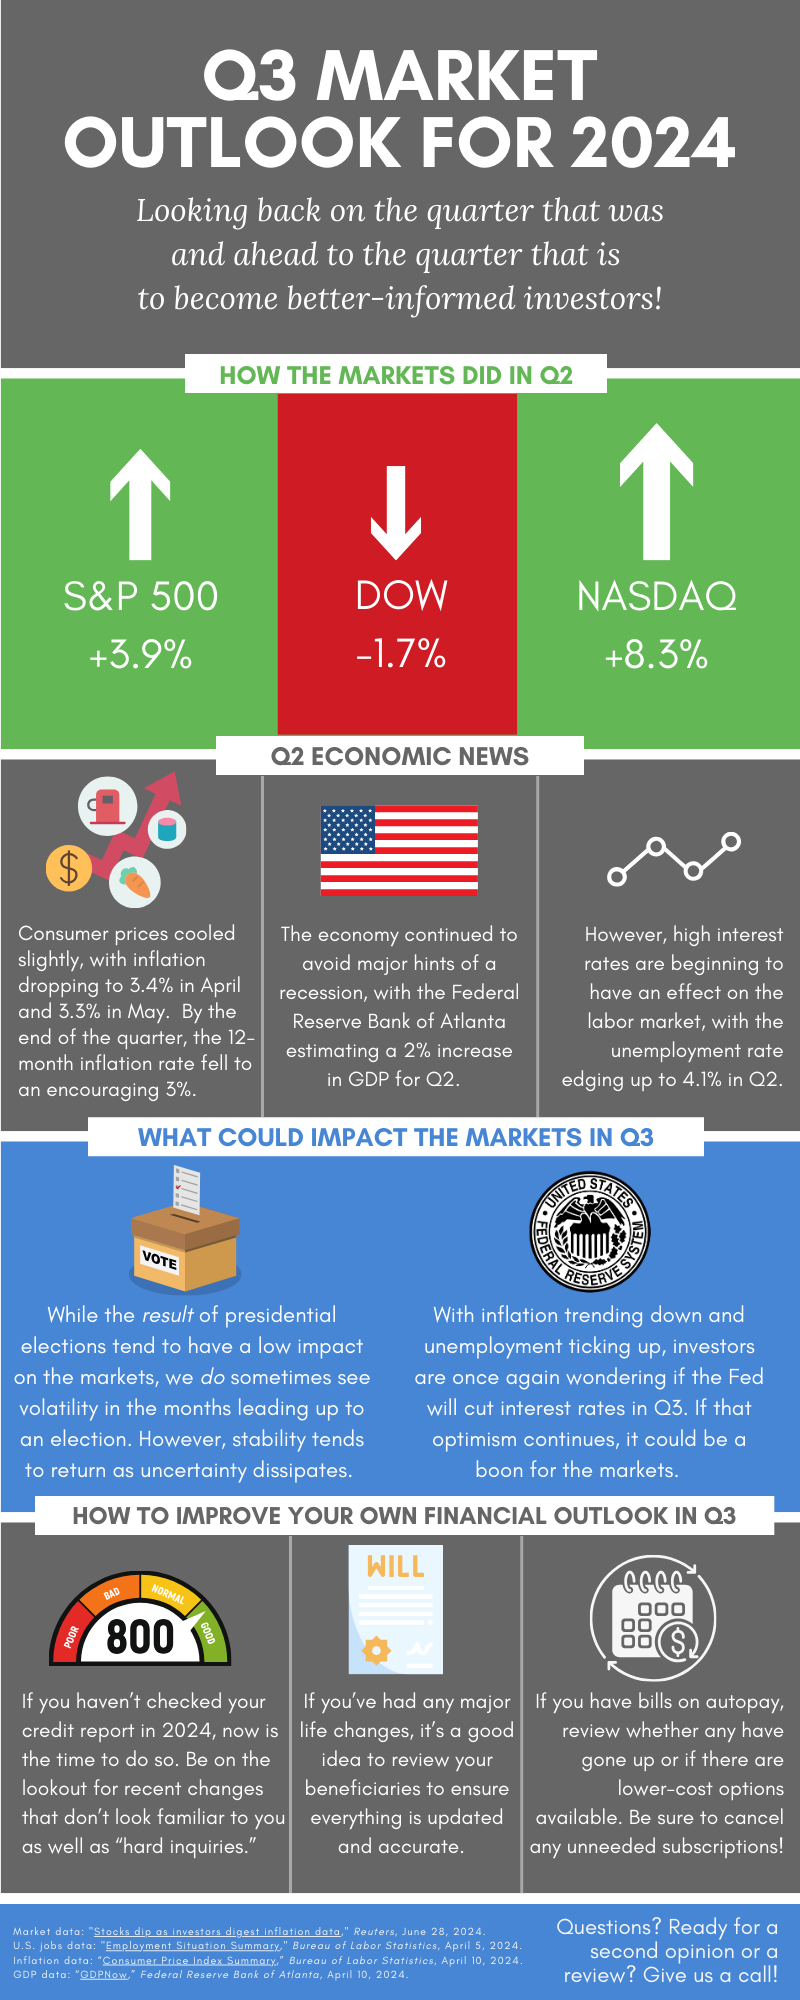 Looking back on the quarter that was and ahead at the quarter that is to become better-informed investors.
How the market did in Q2 and Economic News. What can impact the market in Q3.